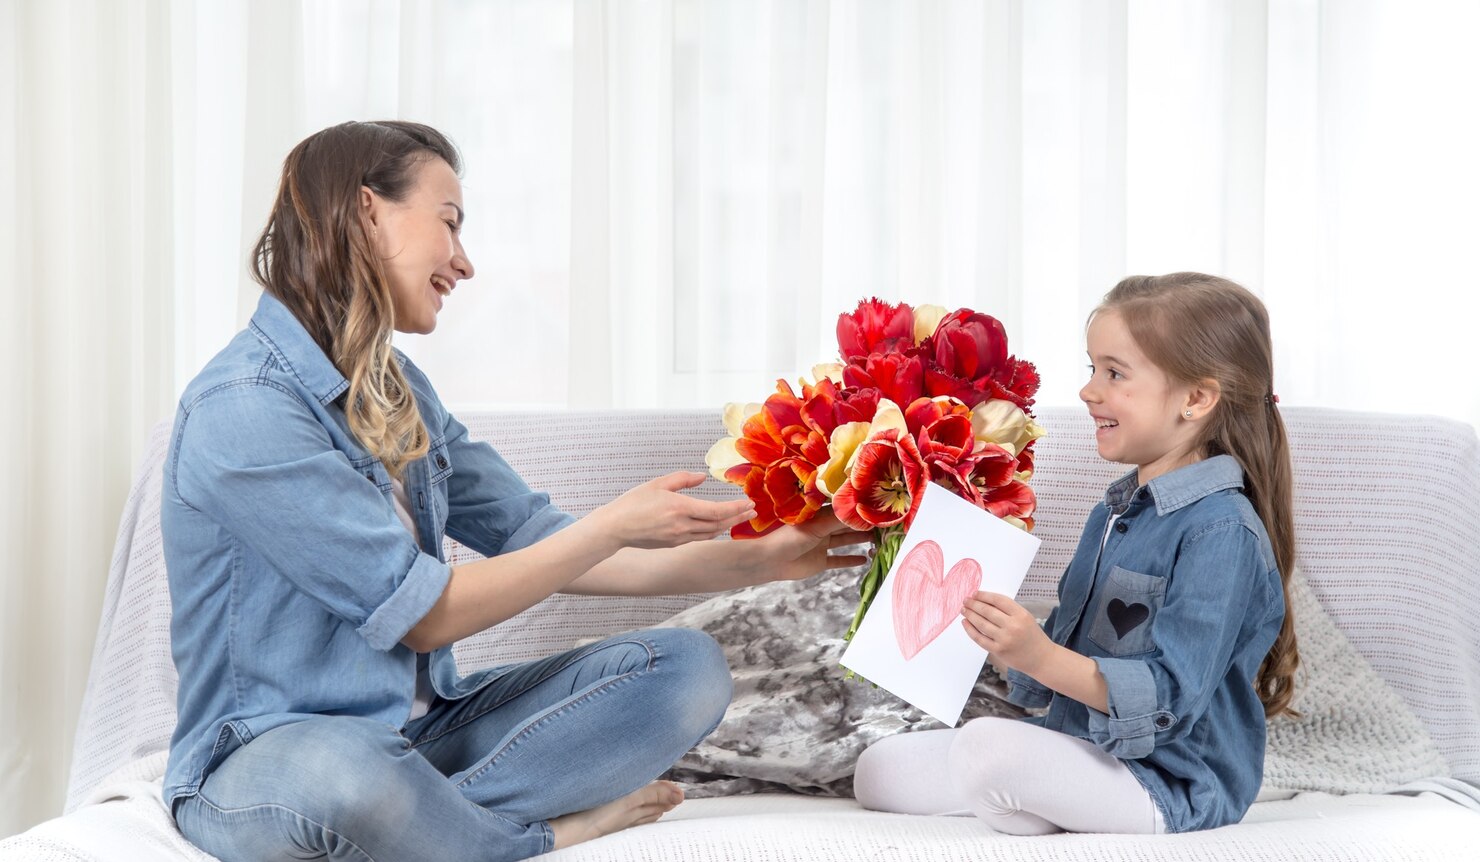 Best Wishes For Kids to Say When Presenting Gifts for Mother's Day